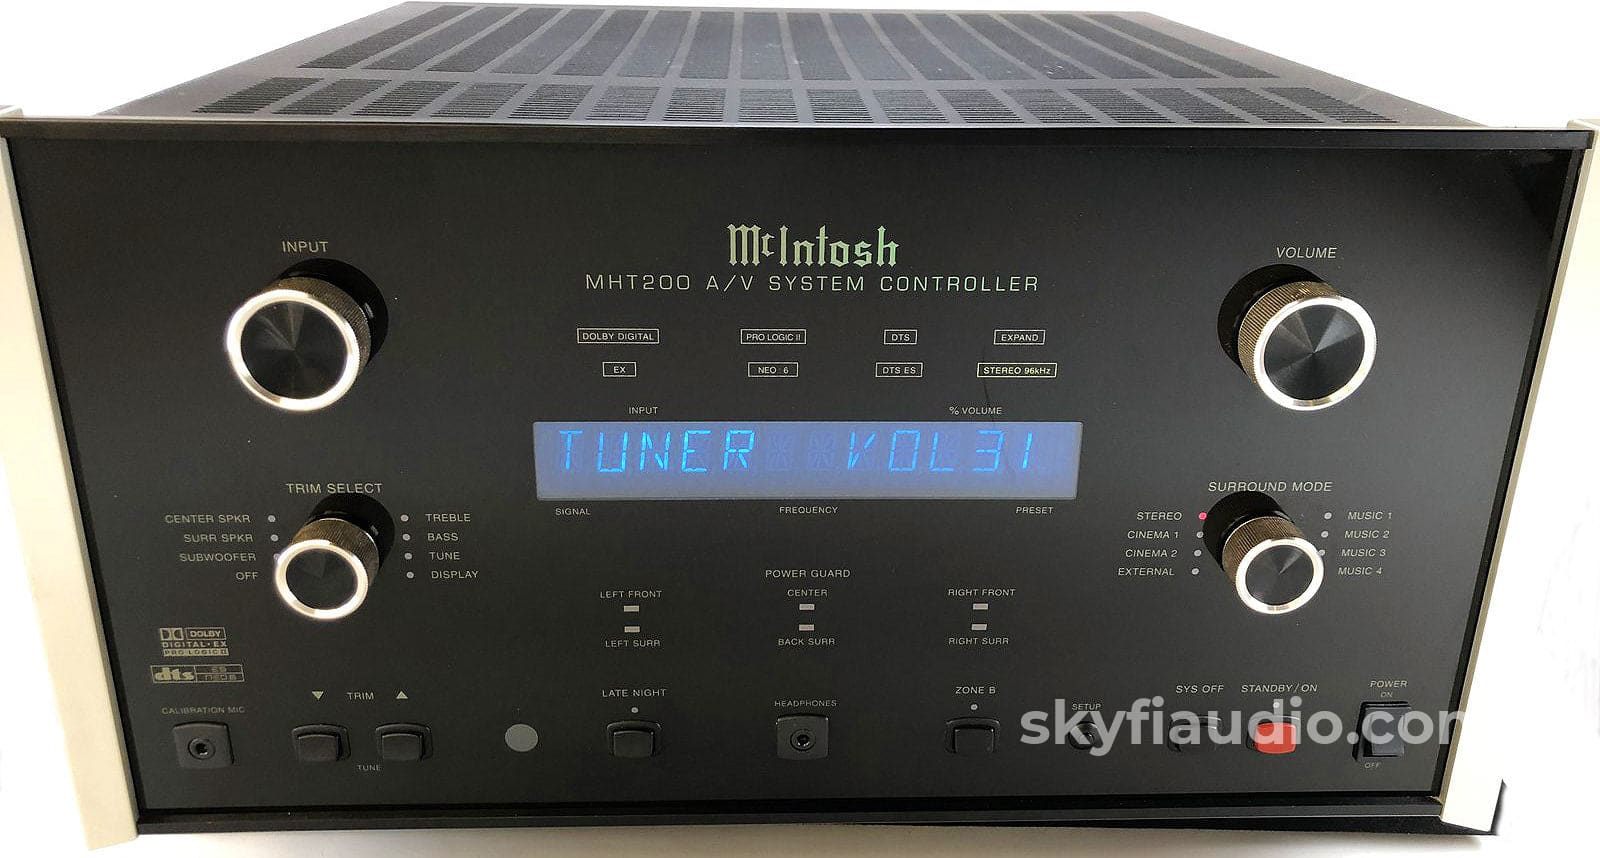 Mcintosh Mht200 Home Theater Receiver - Serviced Integrated Amplifier